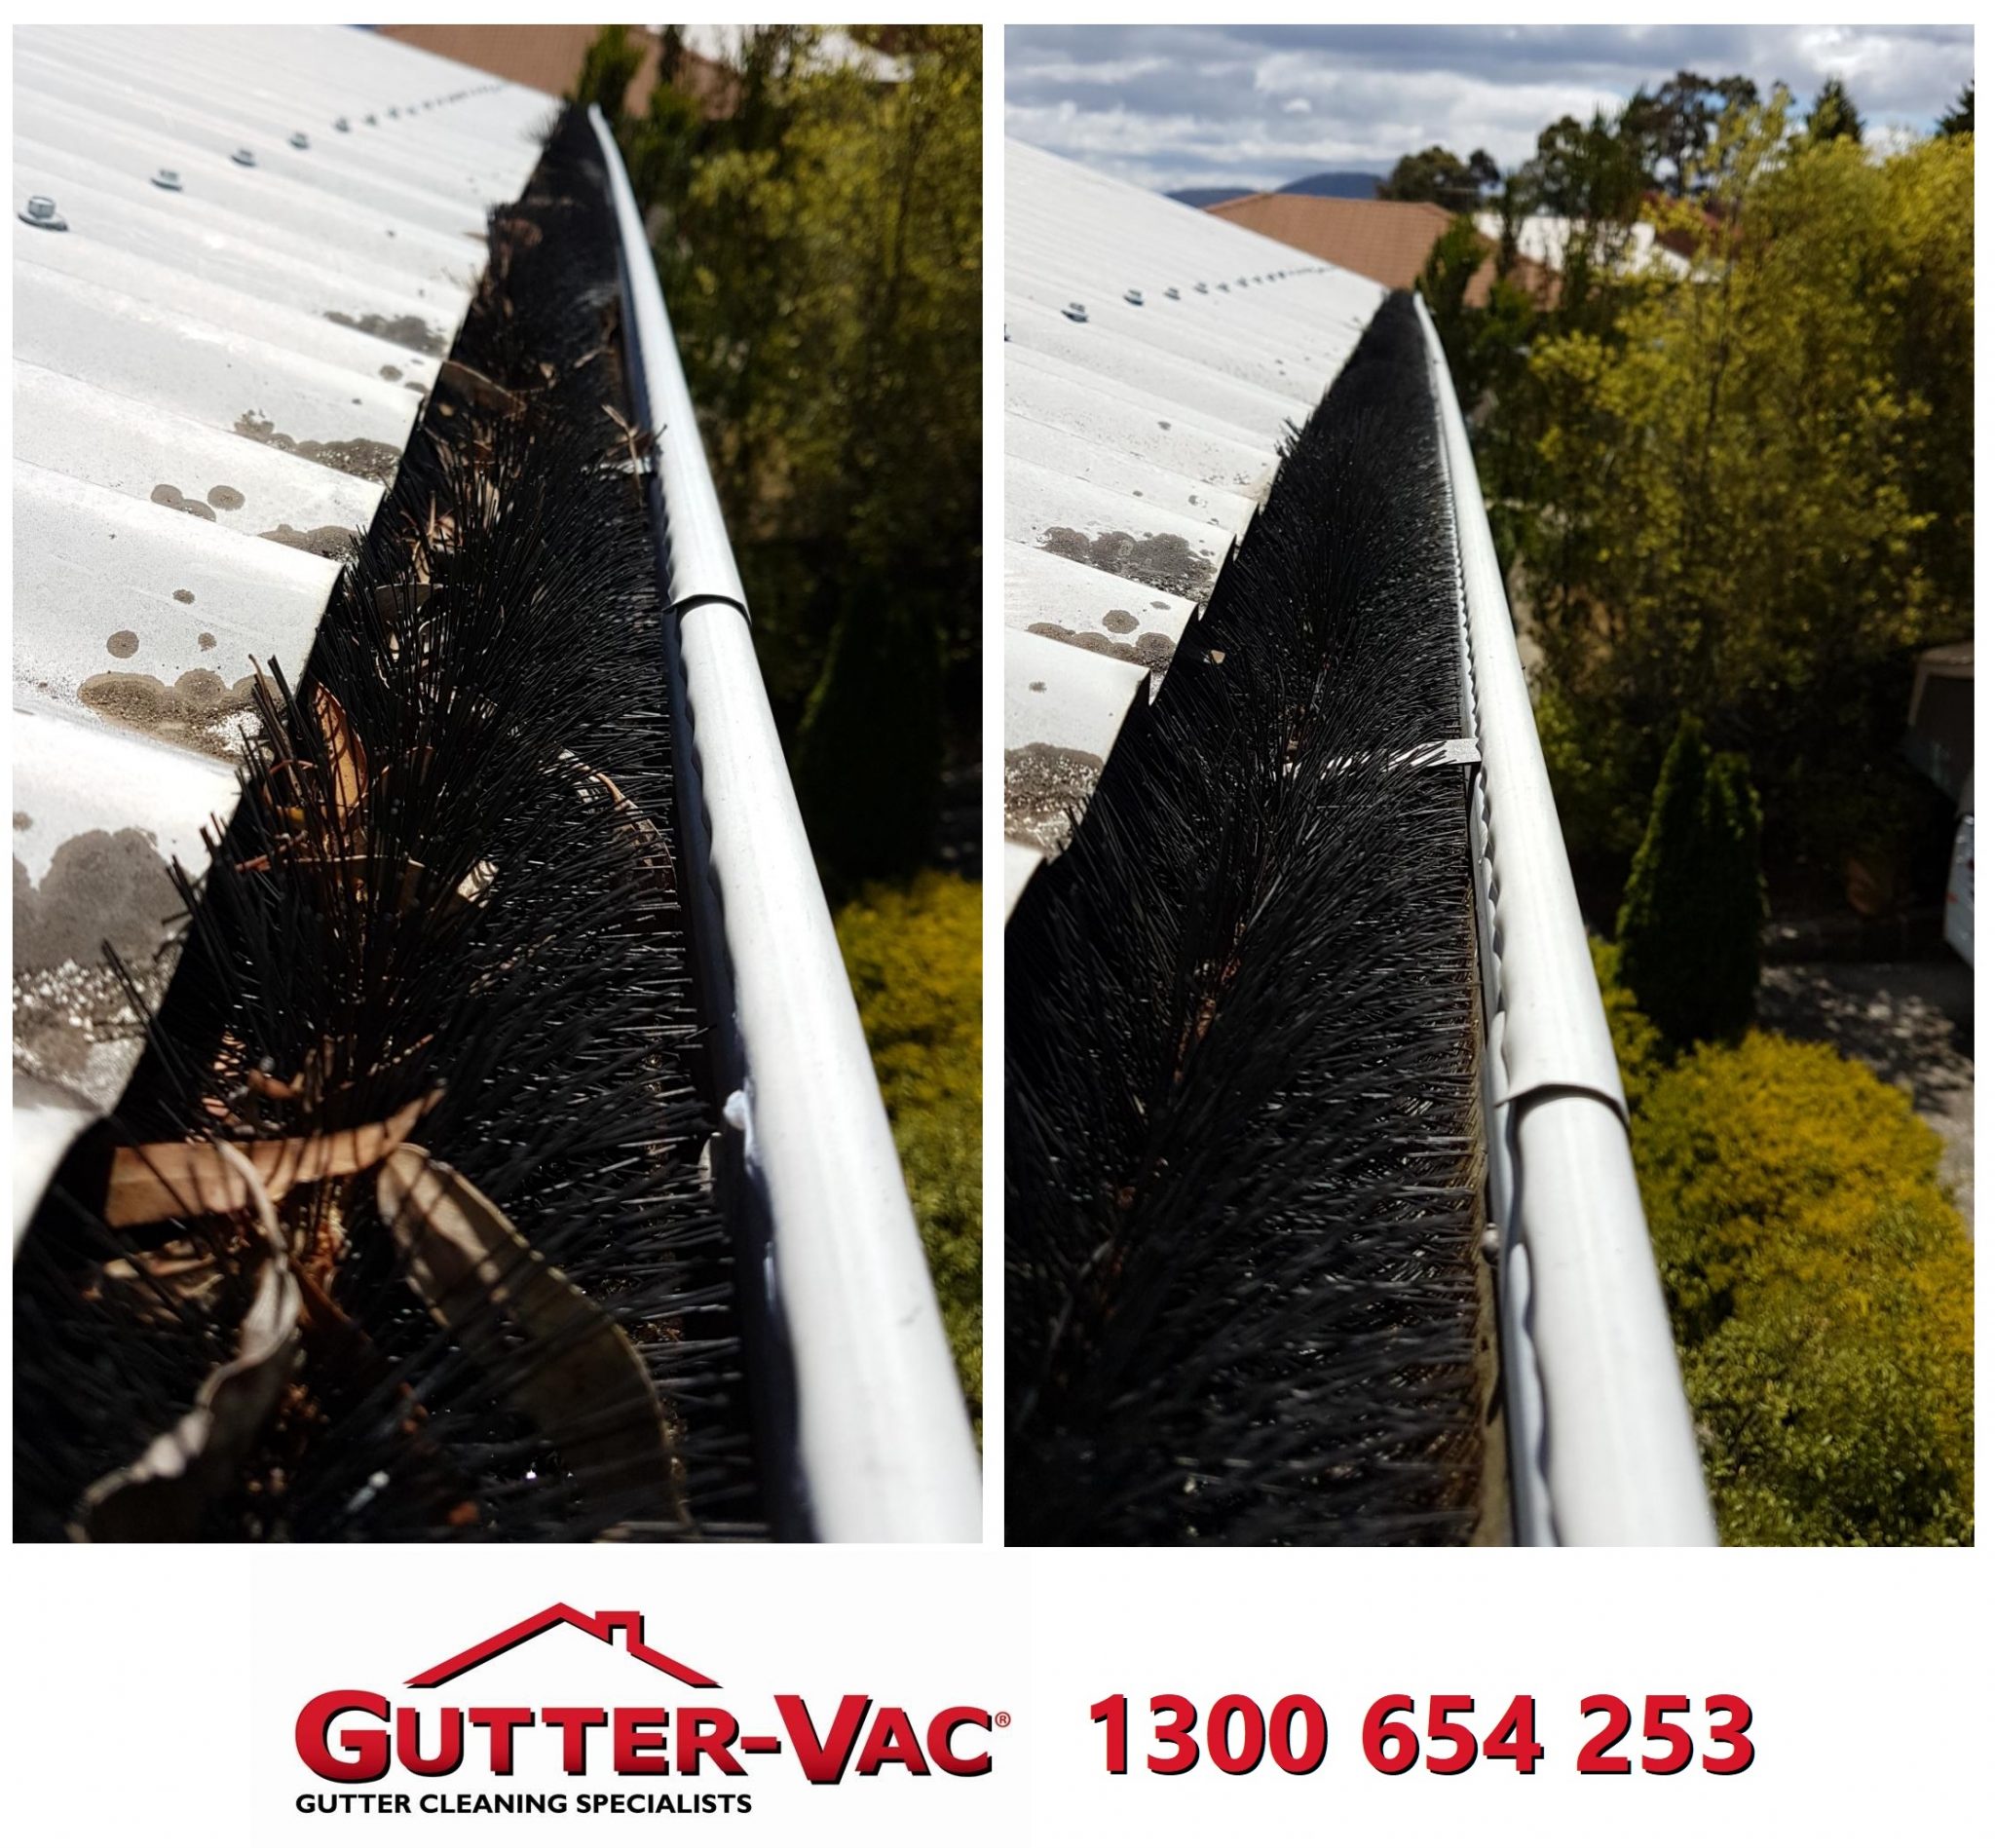 What Is a Gutter Guard and Why Is It Important?